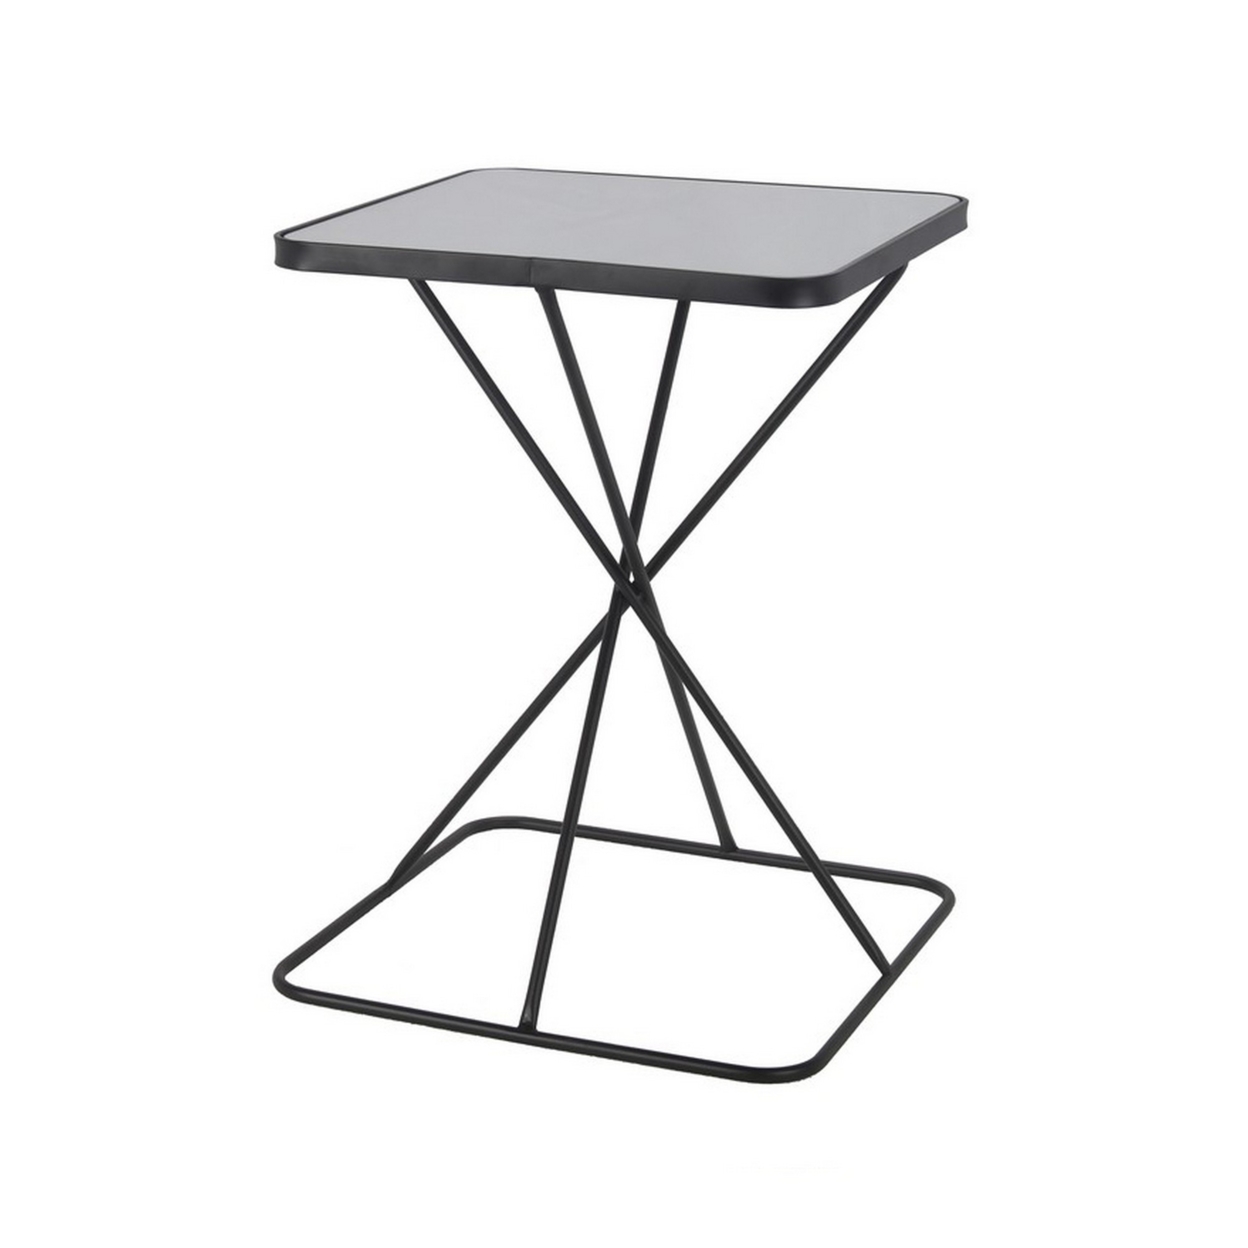 Accent Table With Intersected Metal Legs, Black- Saltoro Sherpi